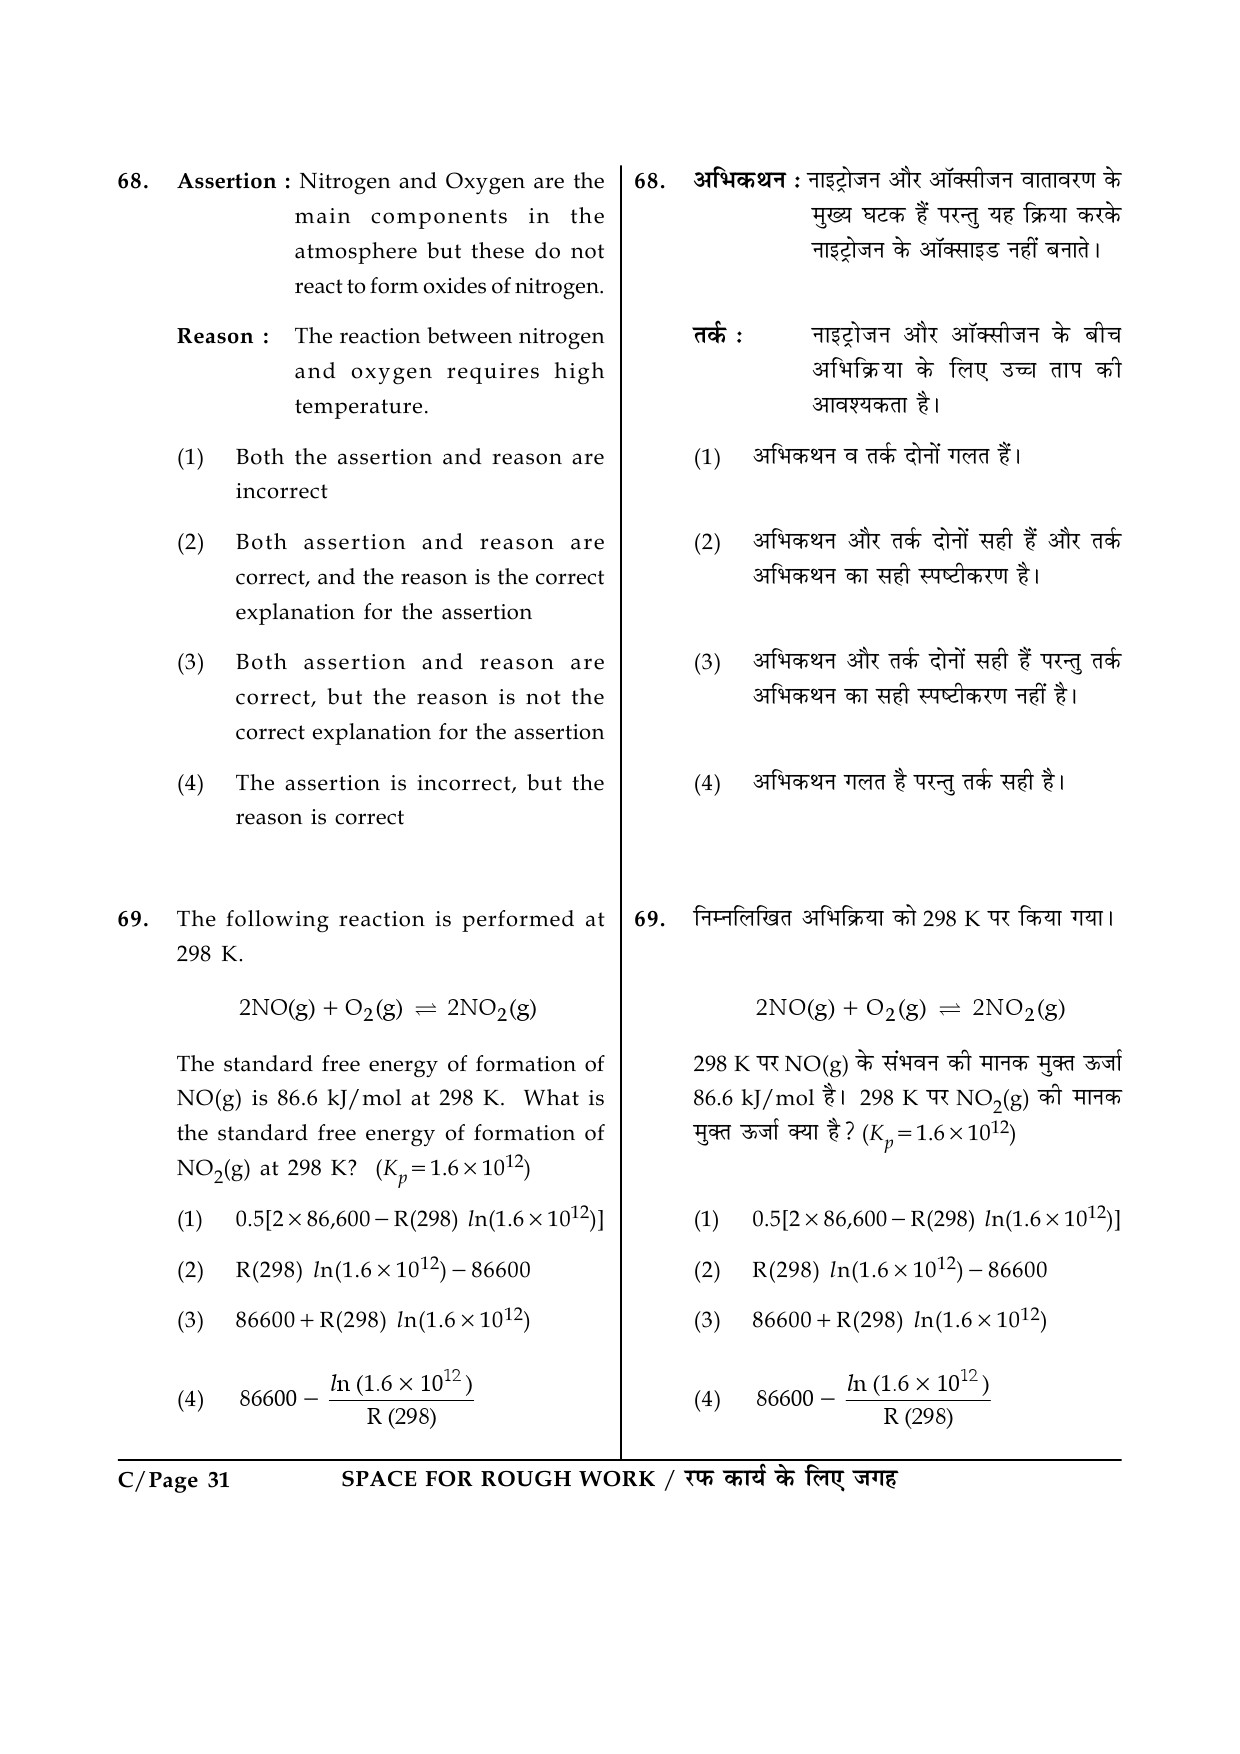 JEE Main Exam Question Paper 2015 Booklet C 31